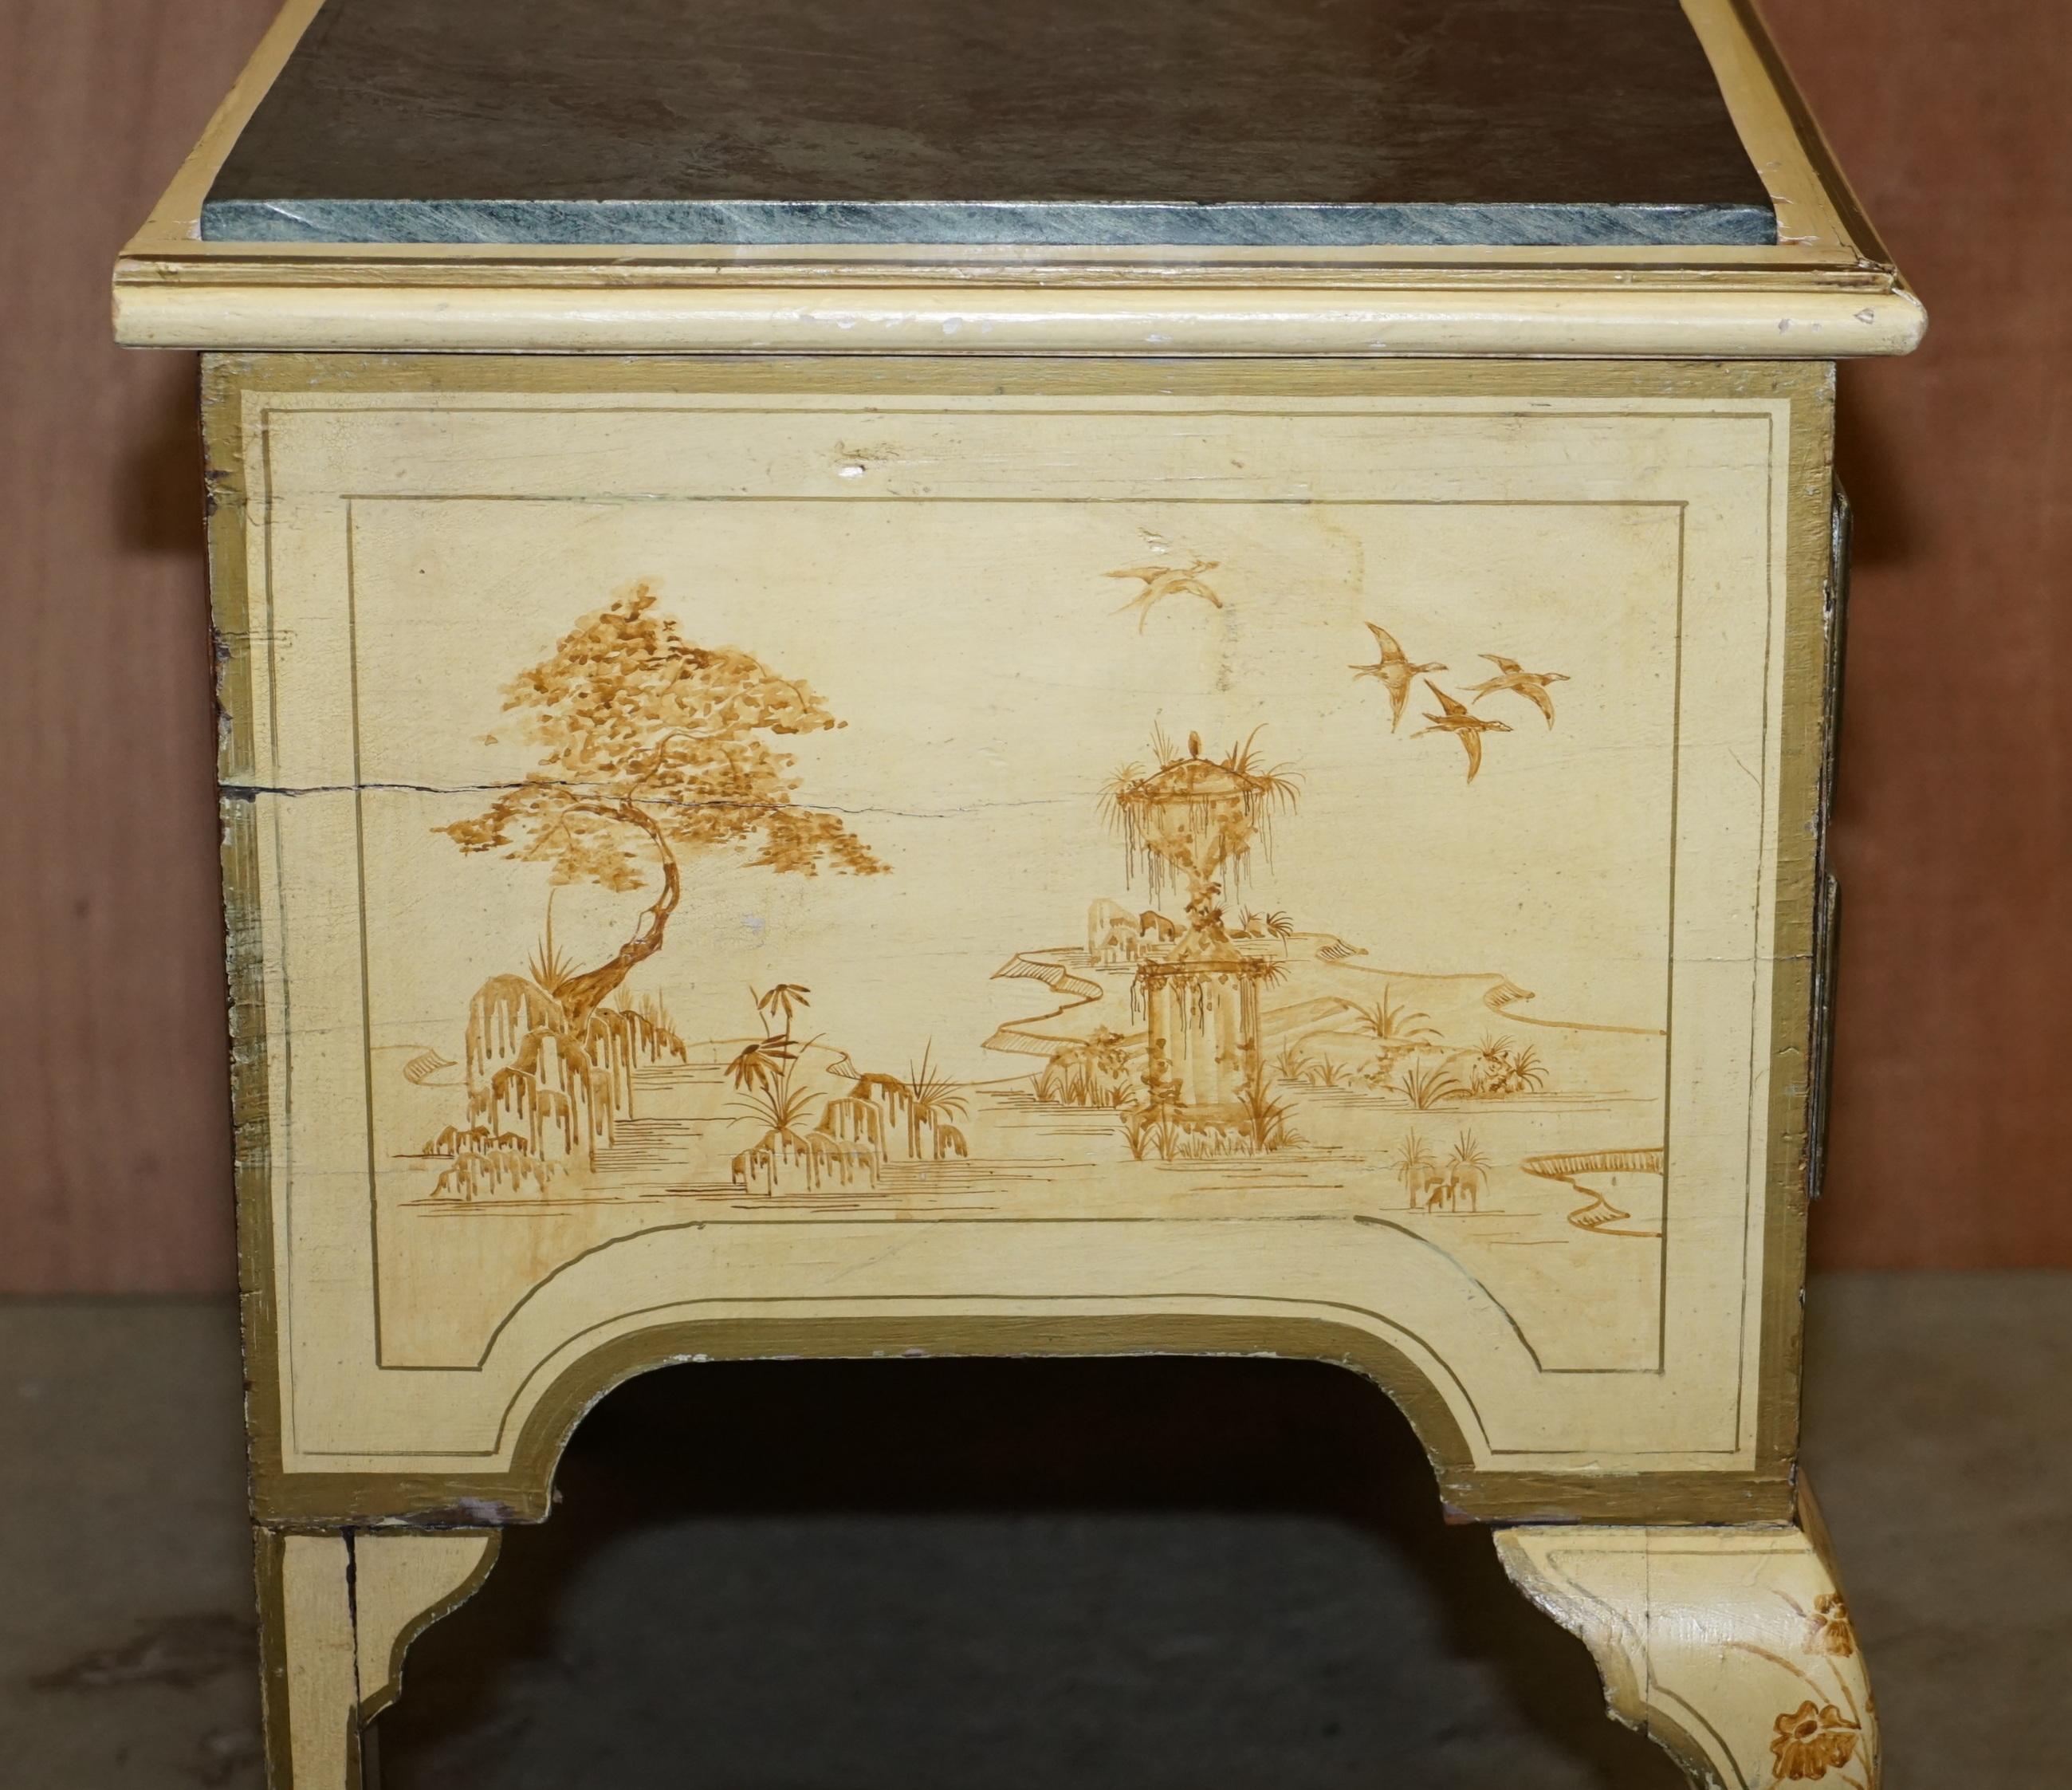 Stunning Chinoiserie Marble Topped Sideboard in the Chinese Chippendale Taste For Sale 9